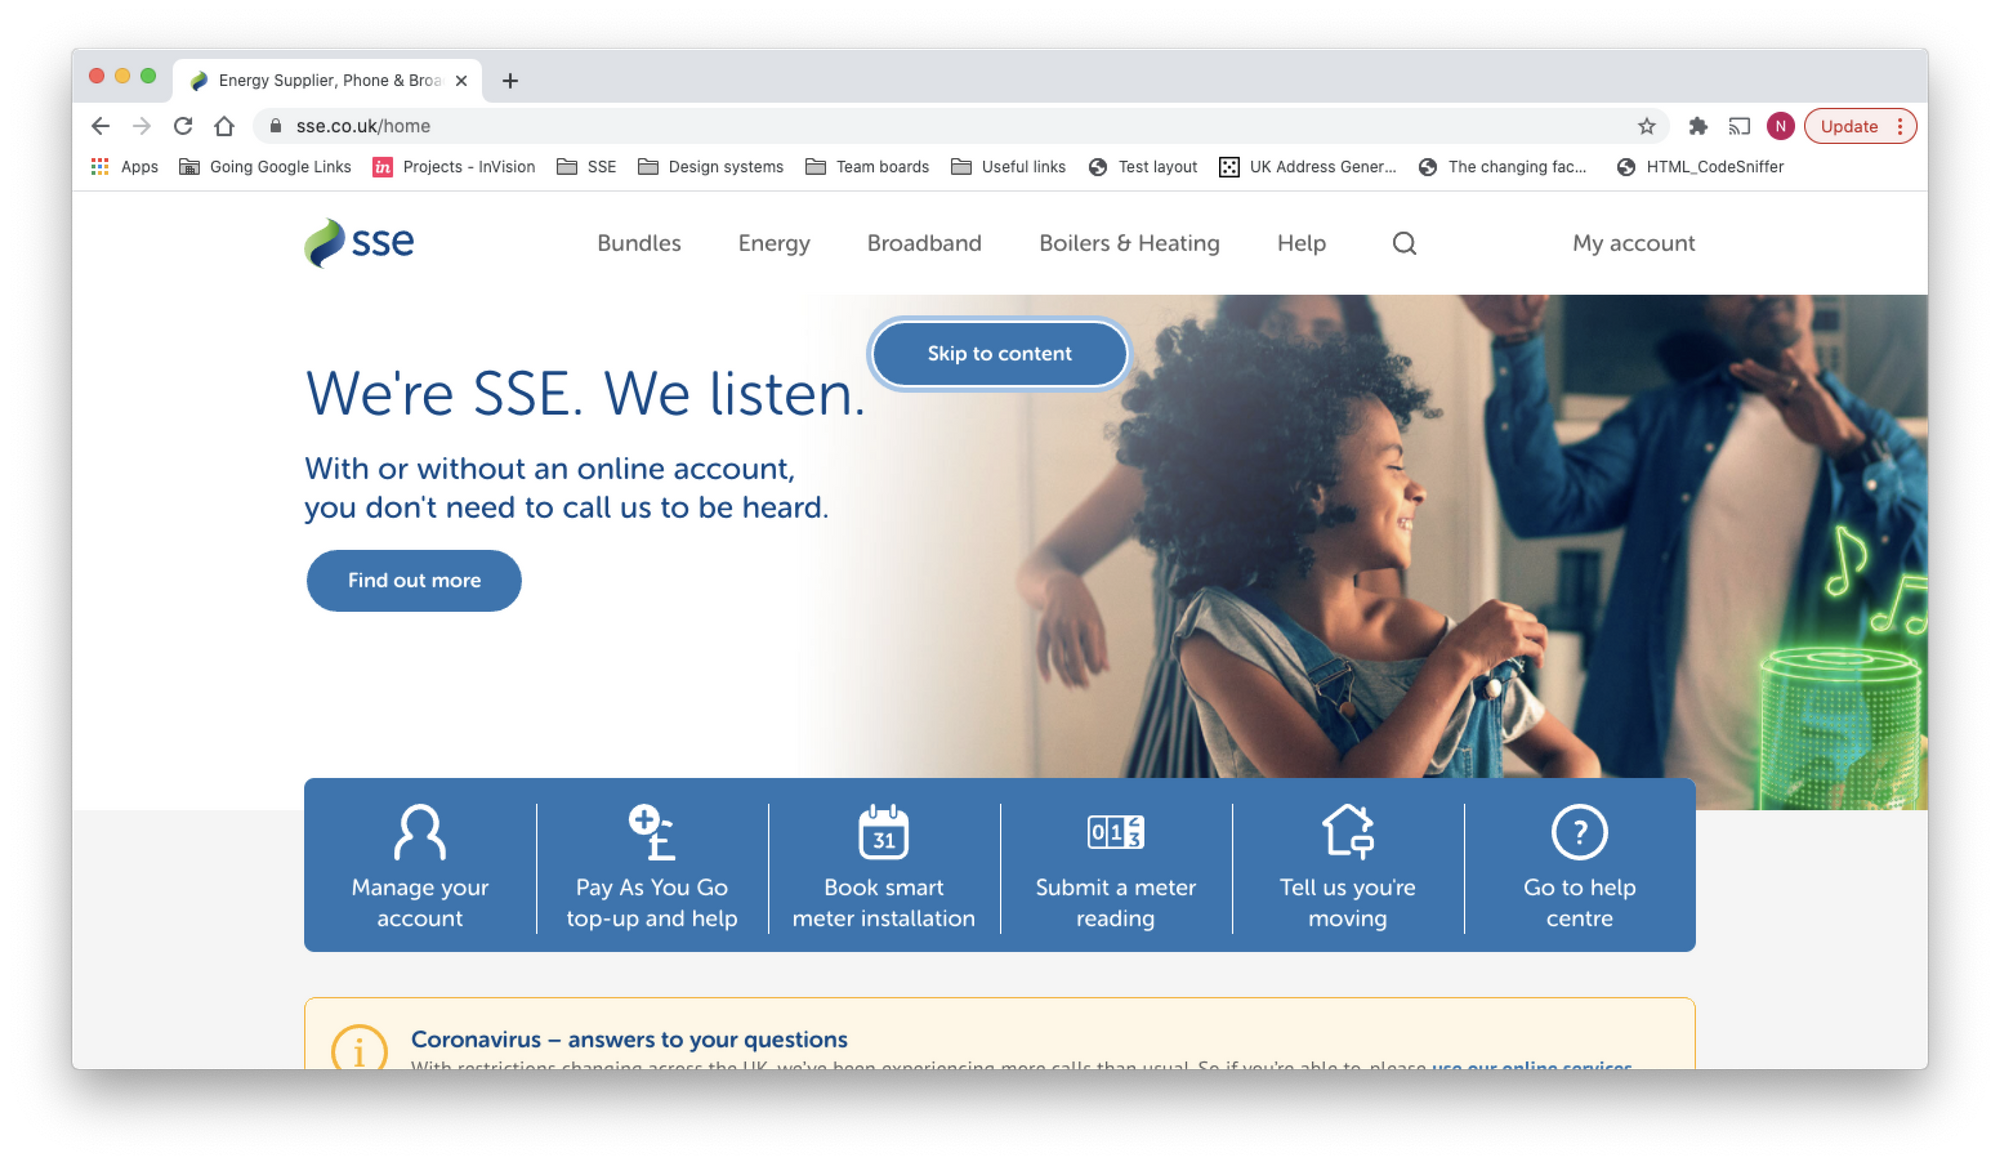 The SSE homepage with a “skip to content” button in focus when someone begins to tab through the webpage.